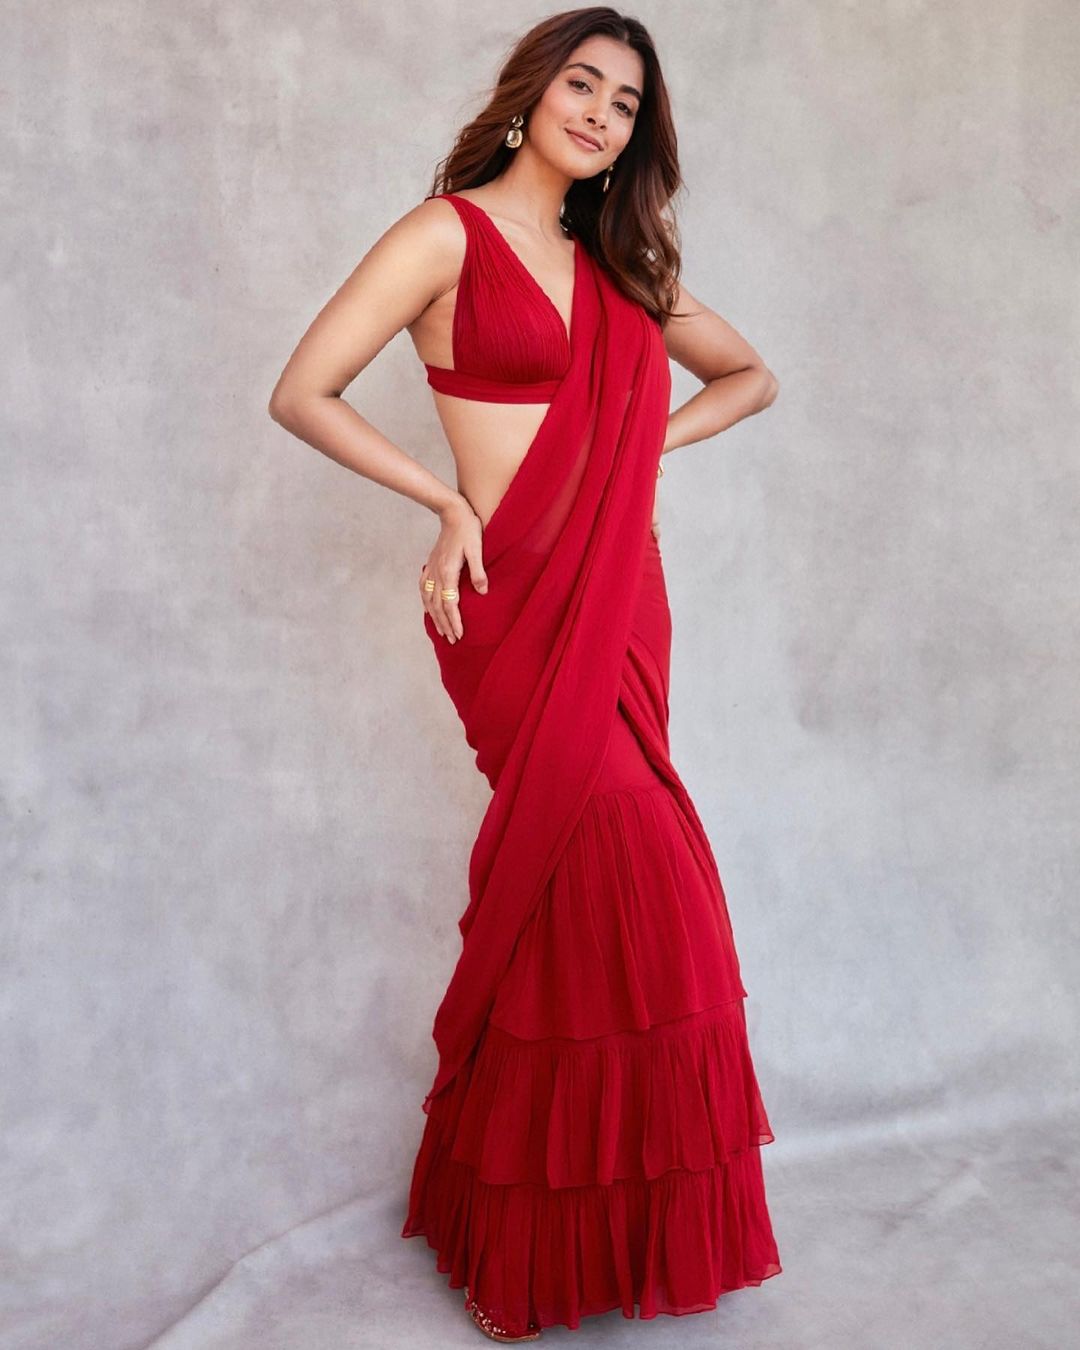 Here are the top 10 latest saree trends of 2023 that you must know about